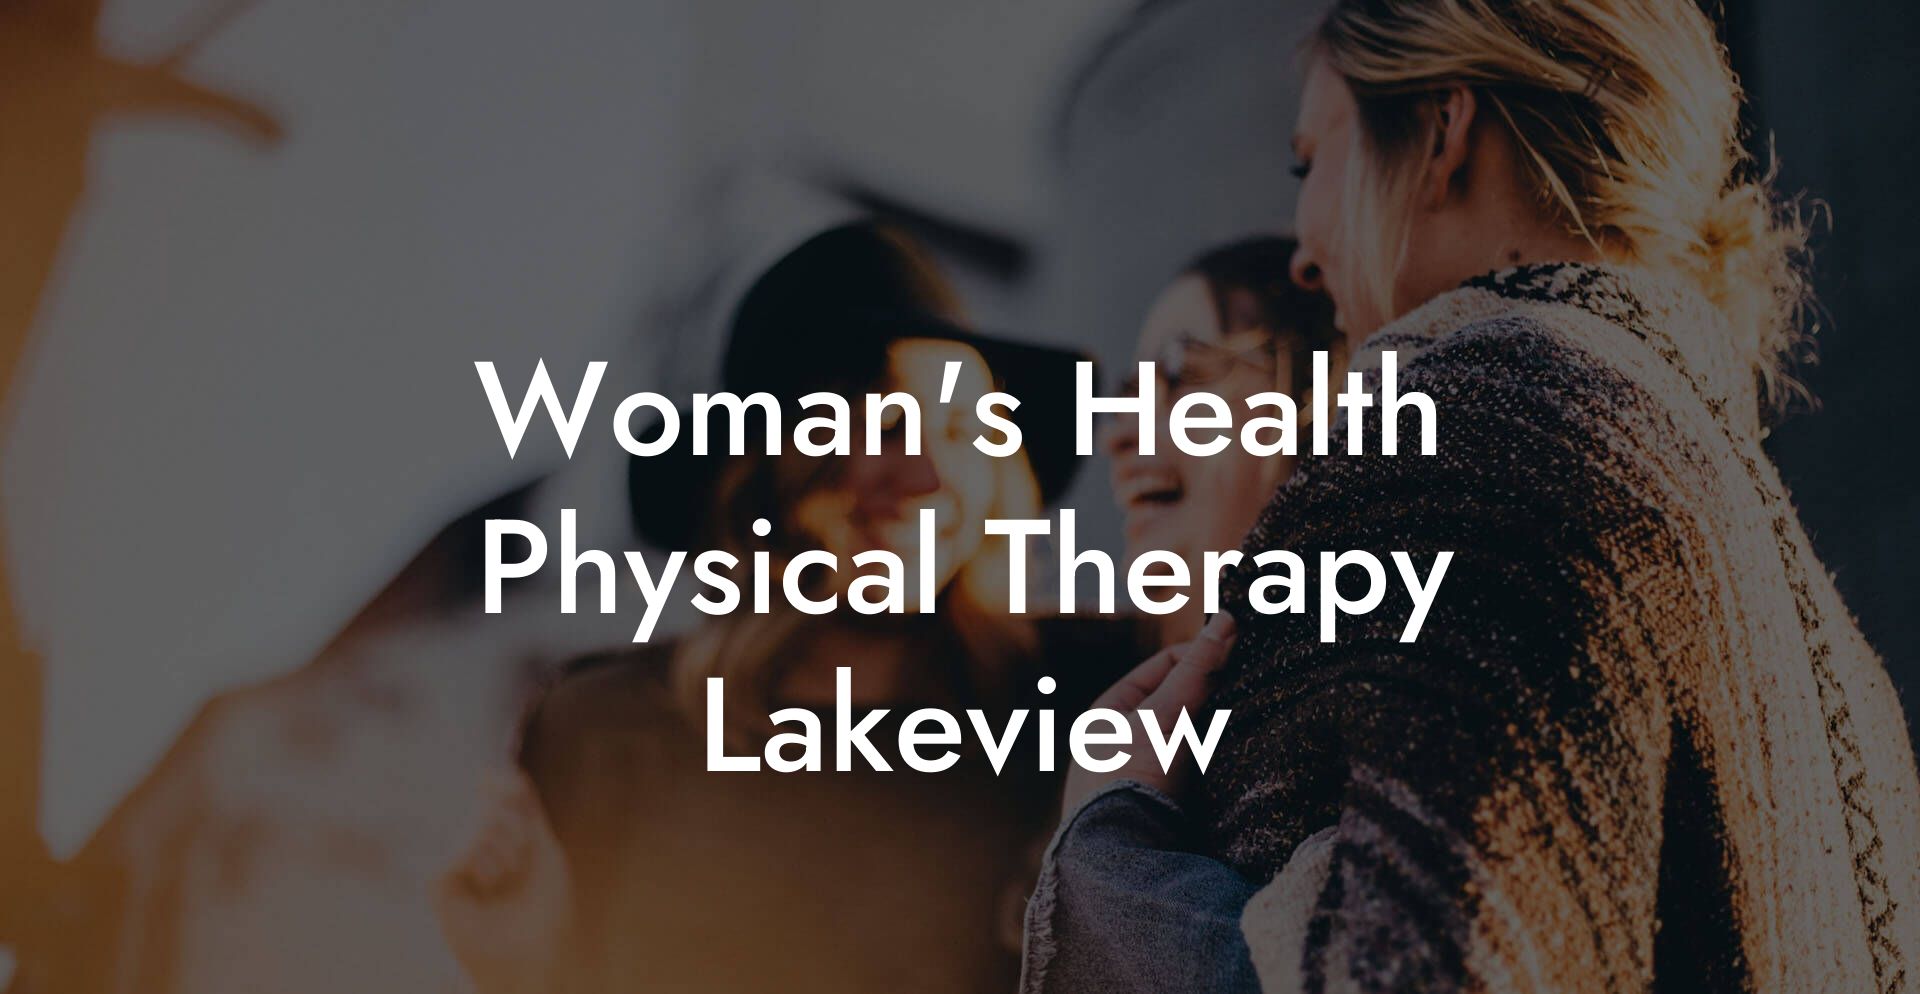 Woman's Health Physical Therapy Lakeview